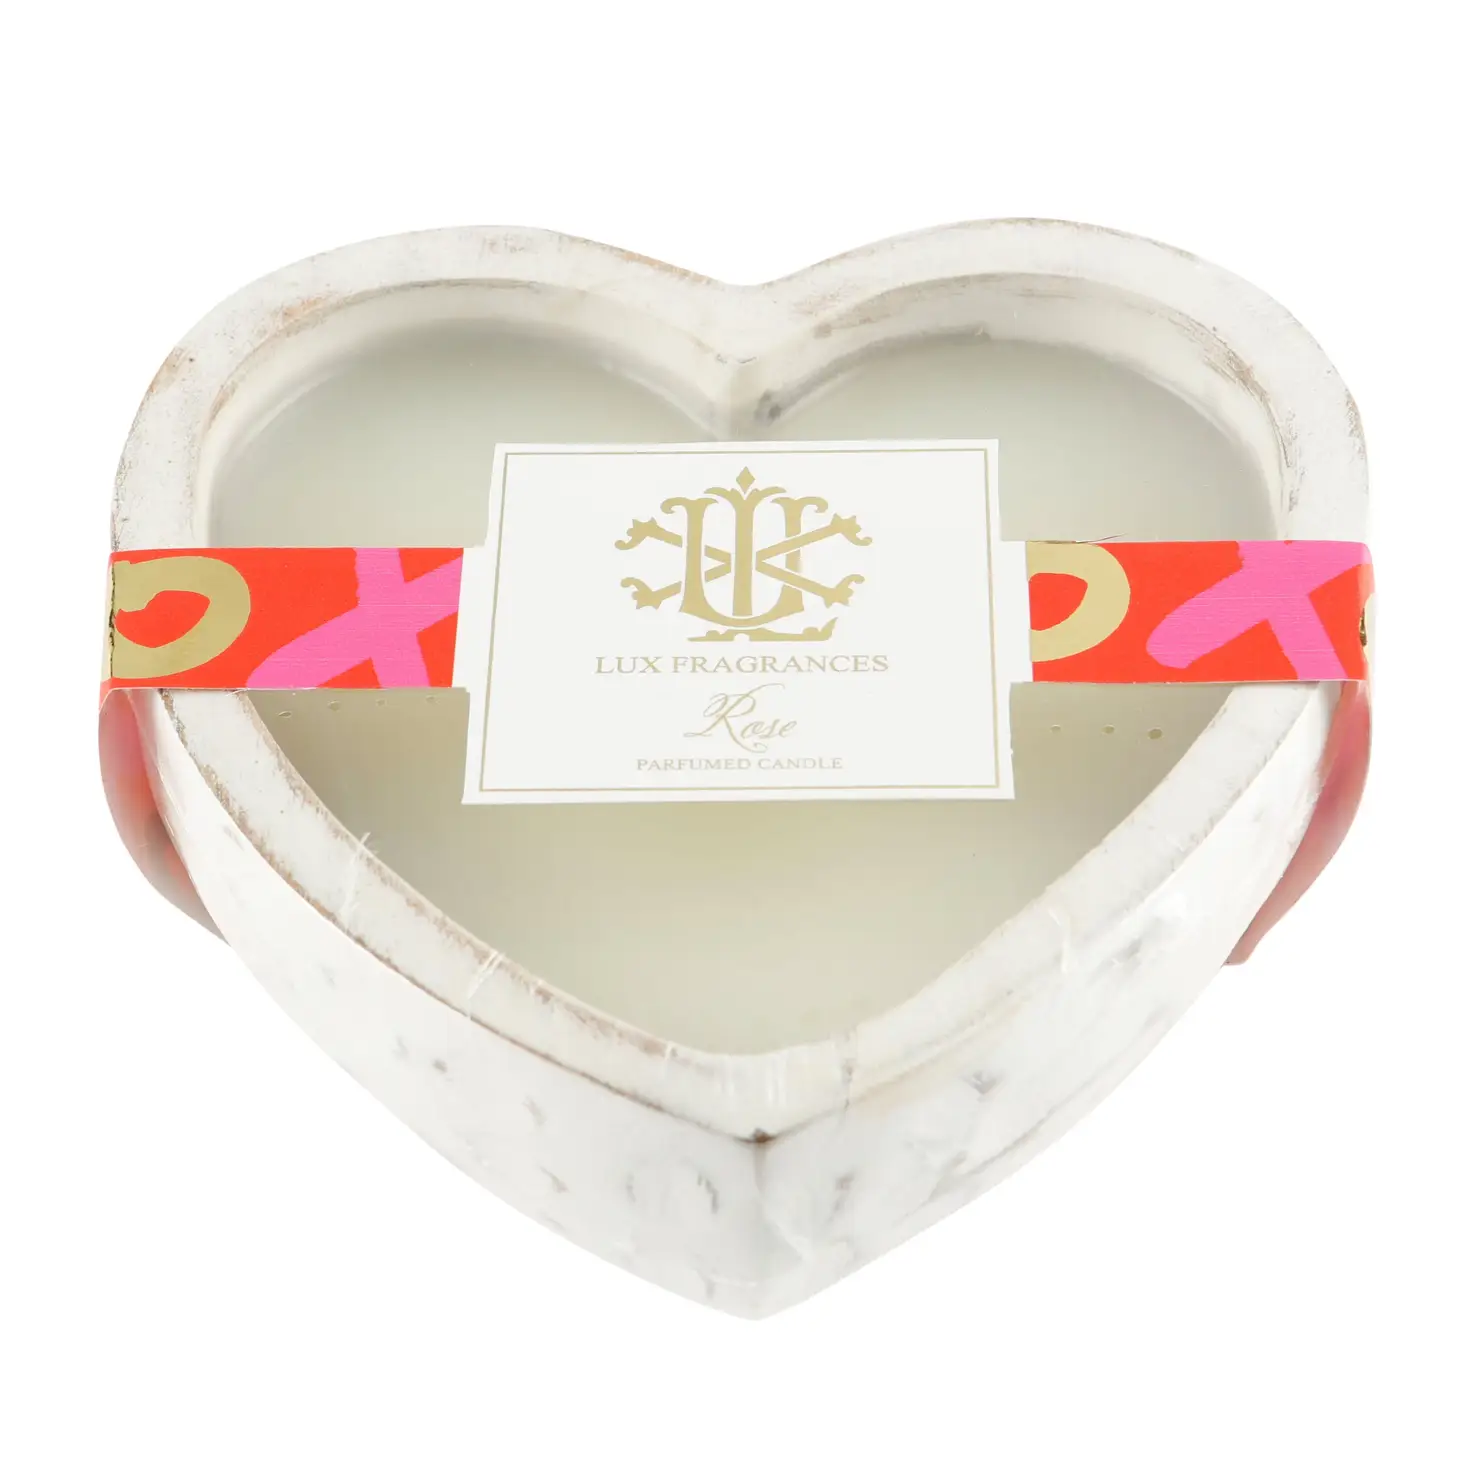 The White Heart Wood Candle